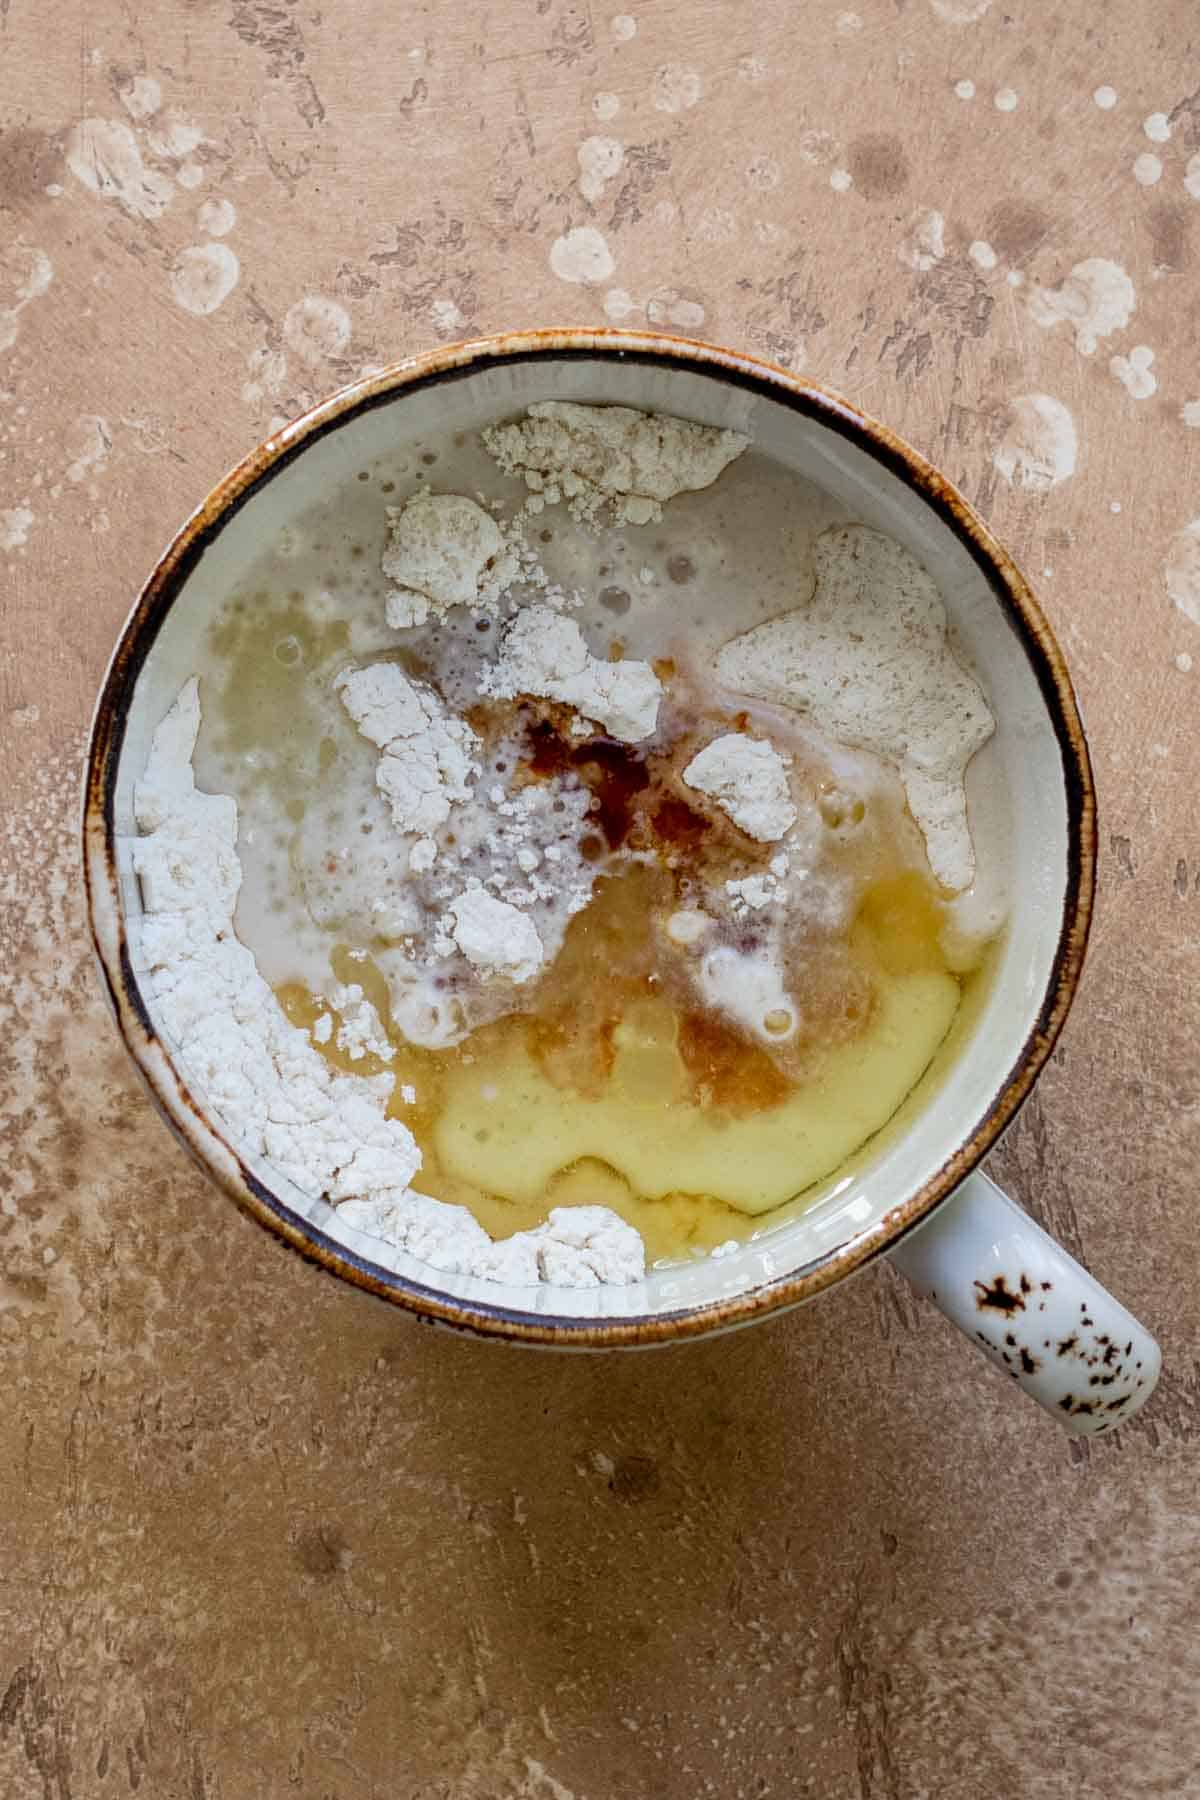 Wet ingredients added into mug with dry ingredients.